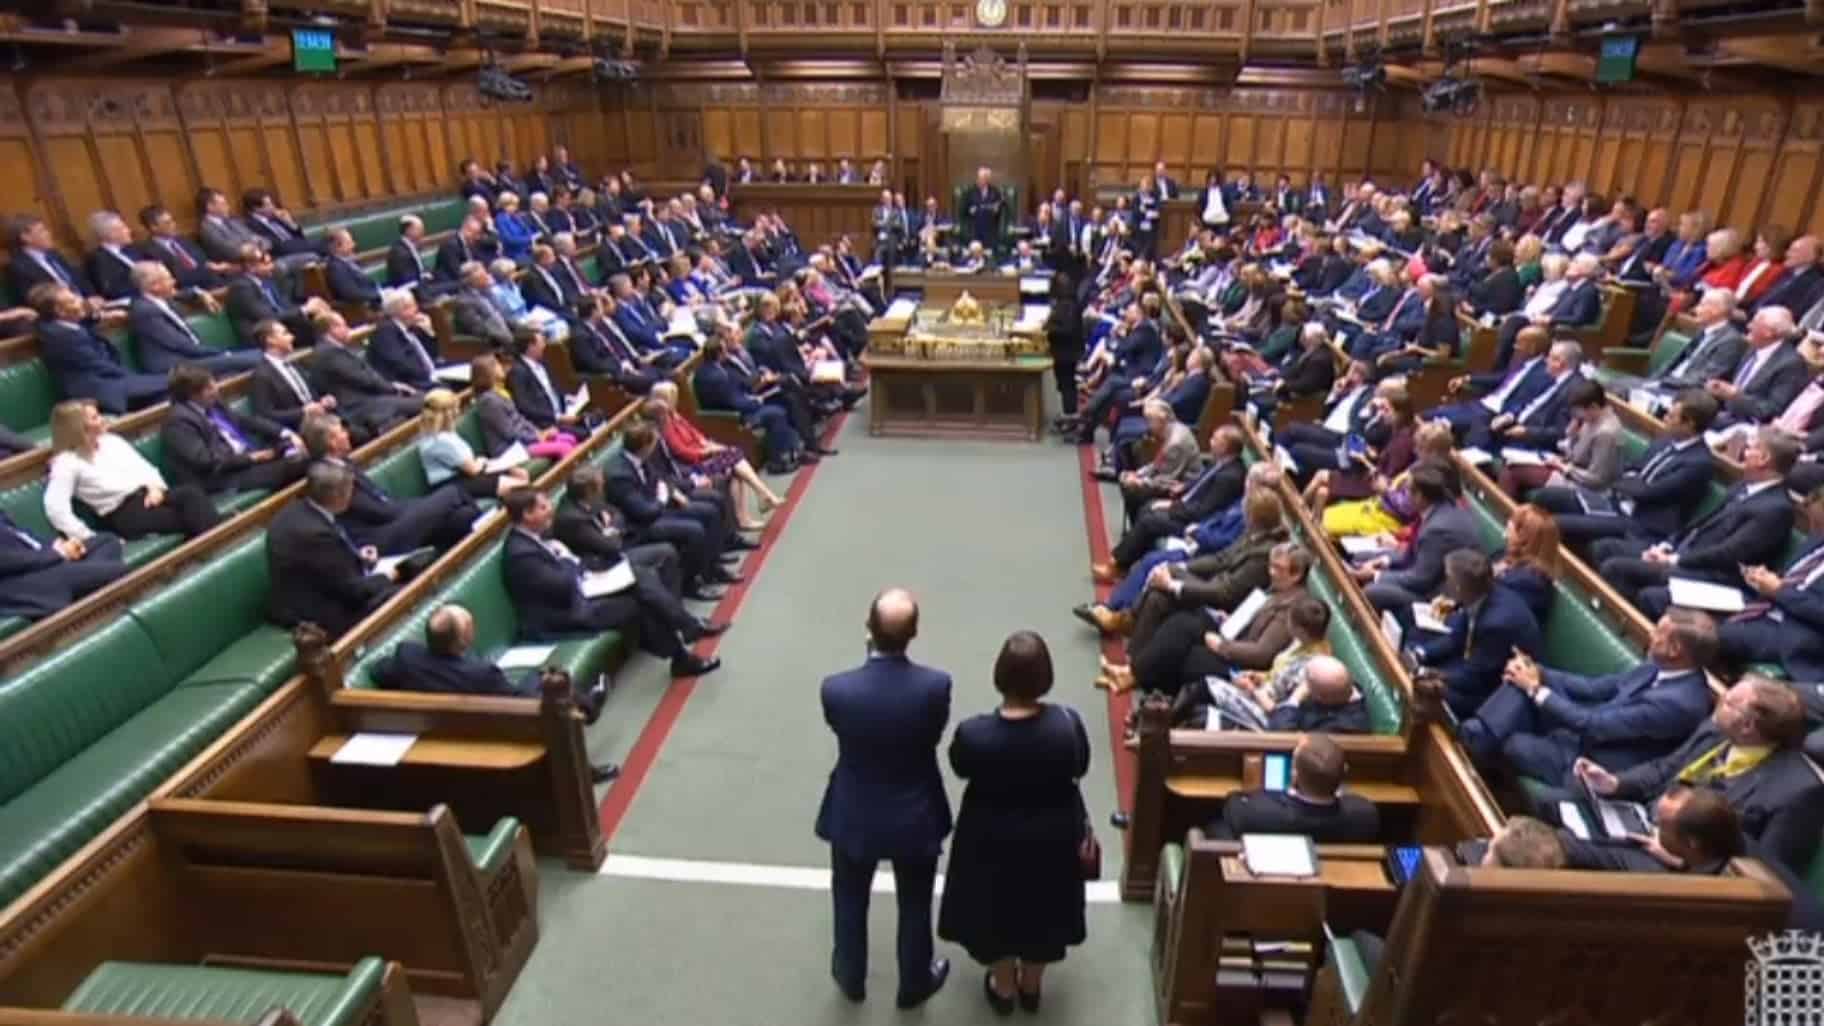 Parliament to sit on a Saturday for first time since Falklands War as Brexit deadline nears